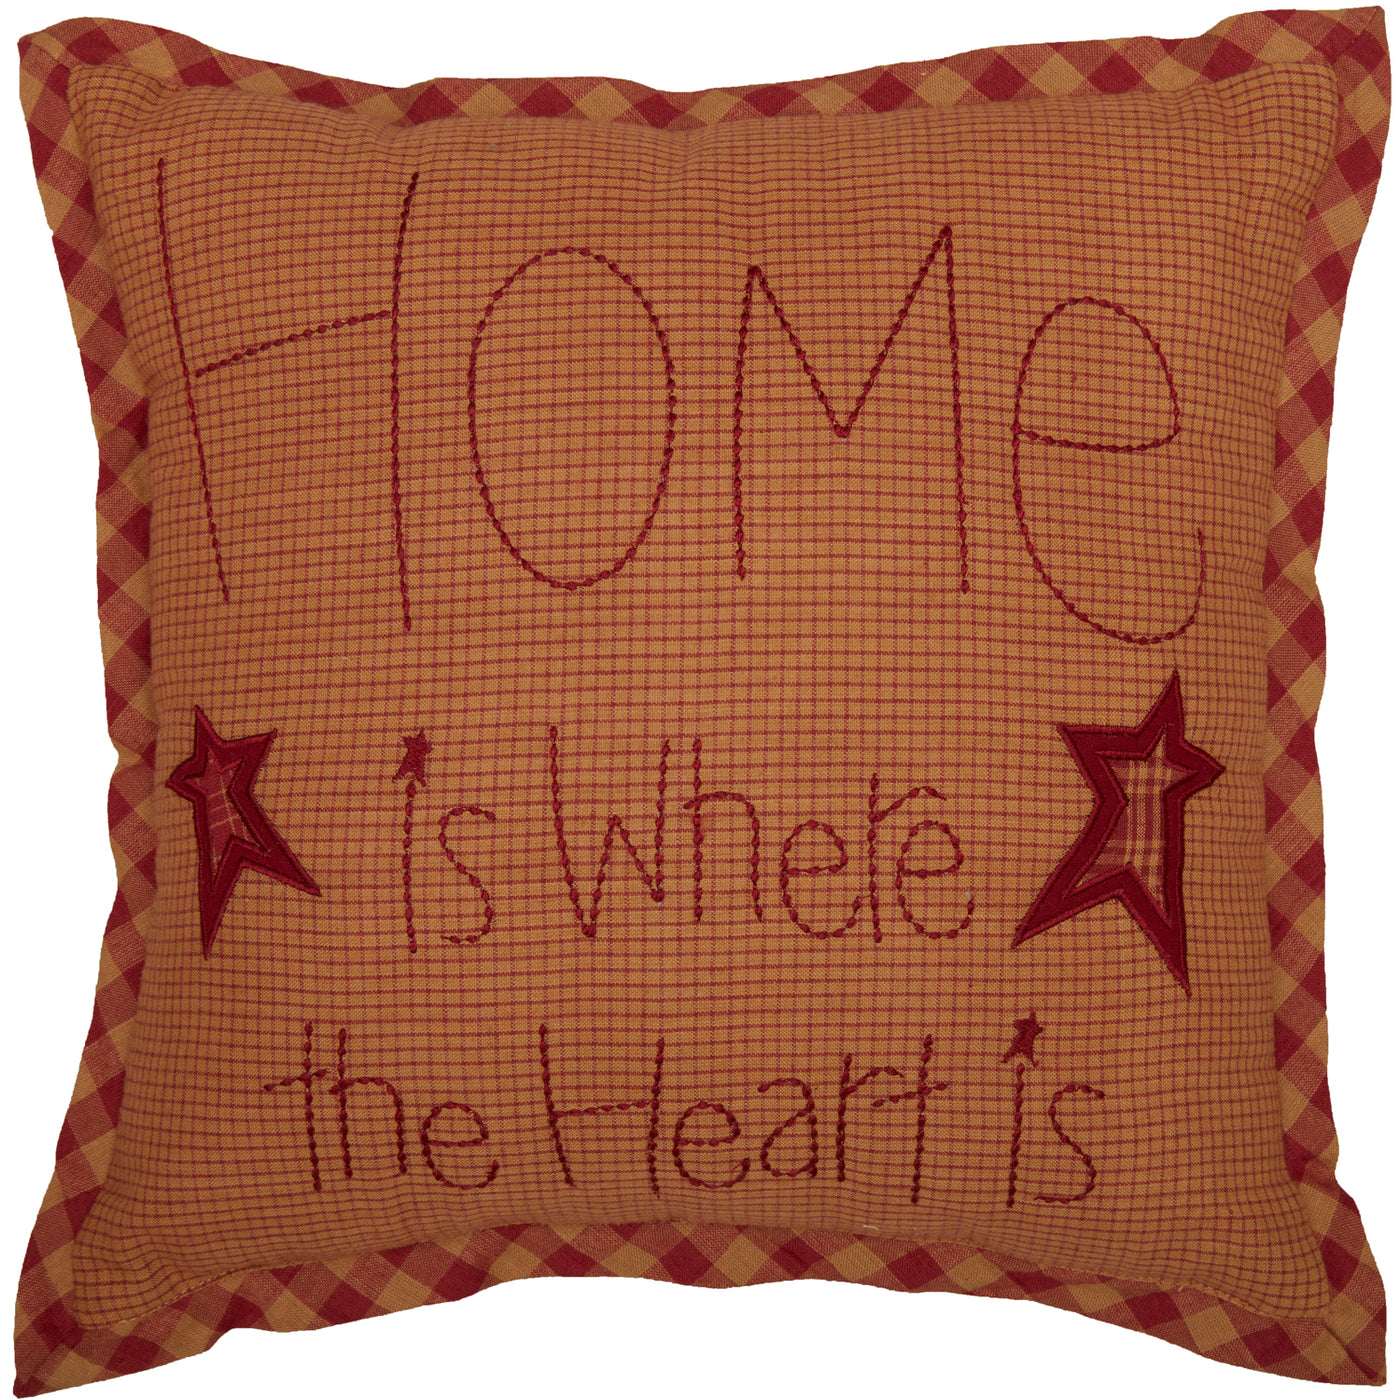 Ninepatch Star Home 12" Throw Pillow